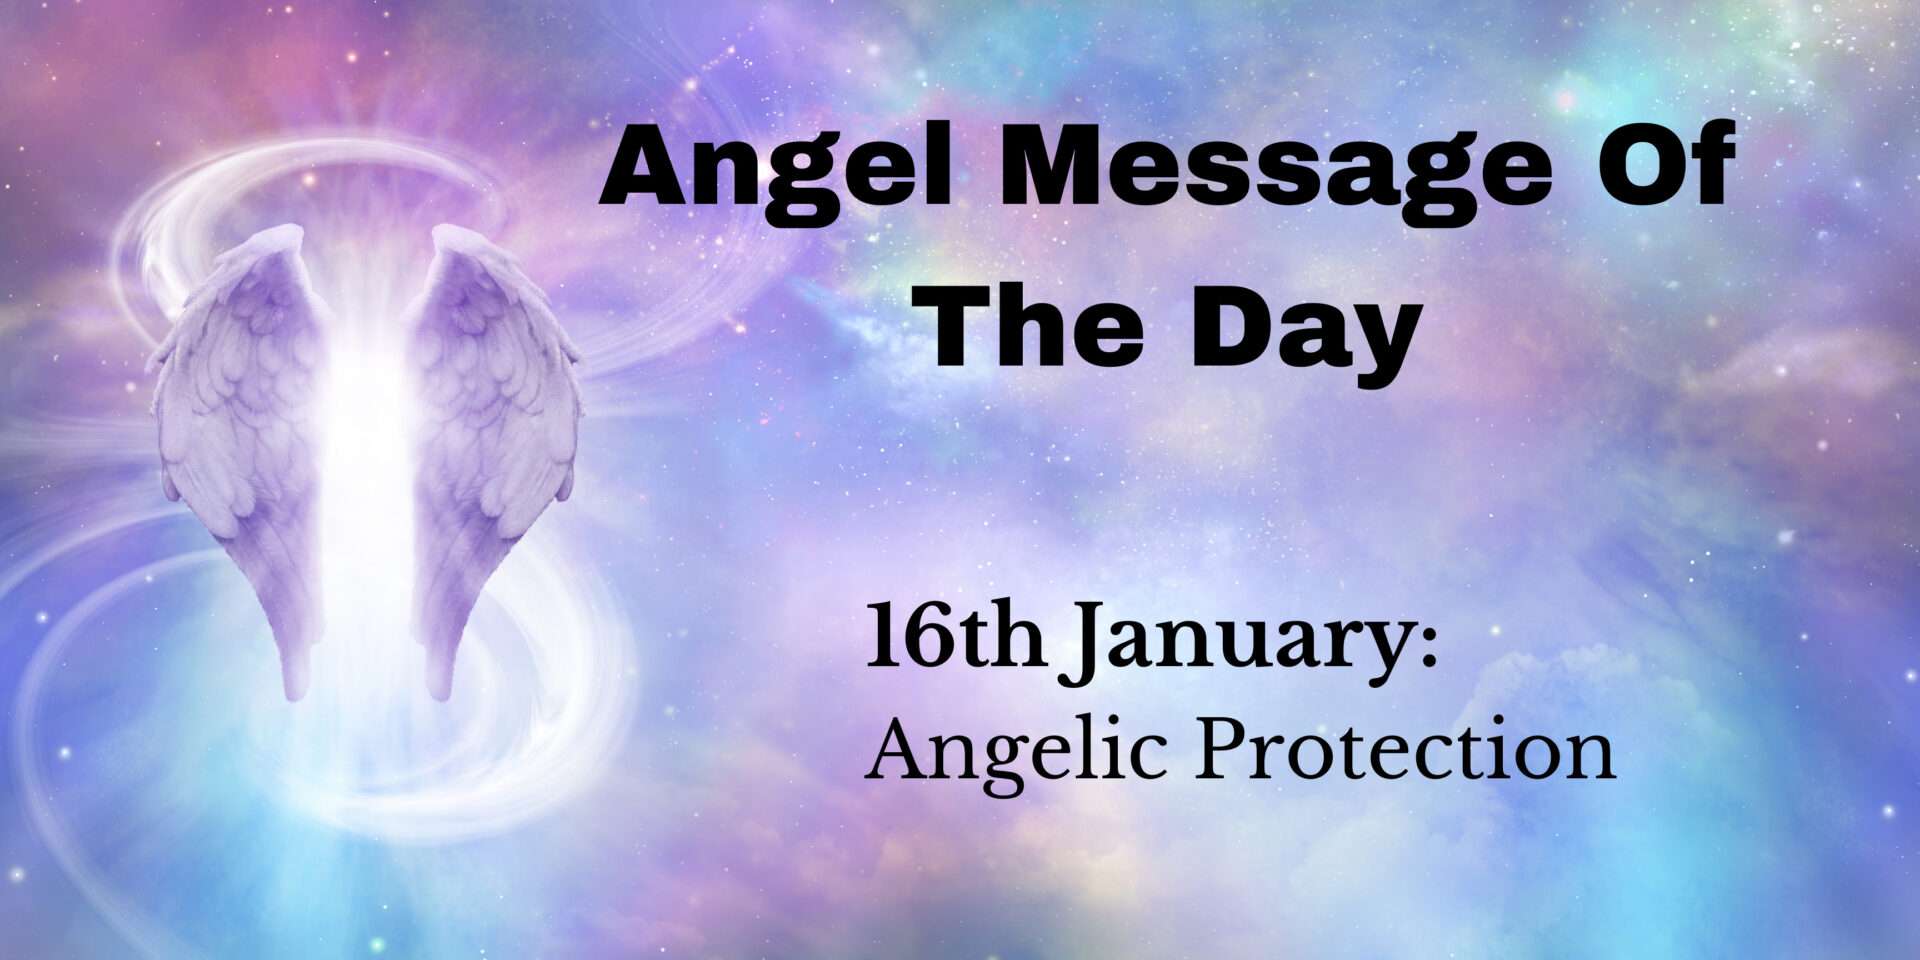 angel message of the day : angelic protection